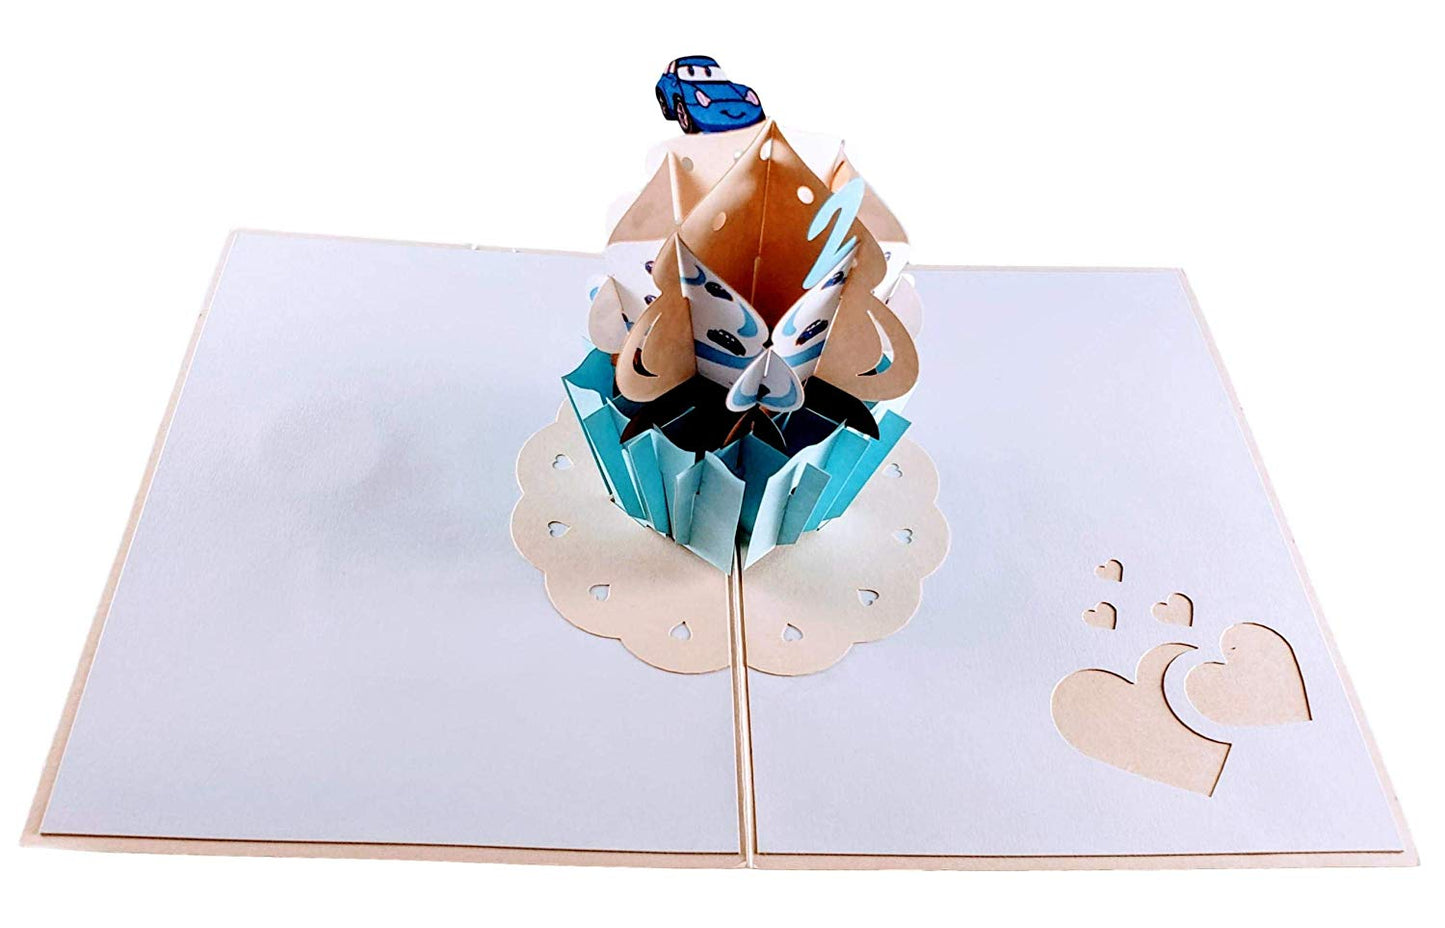 2nd Birthday Blue Car Cupcake 3D Pop Up Greeting Card - Birthday - iGifts And Cards